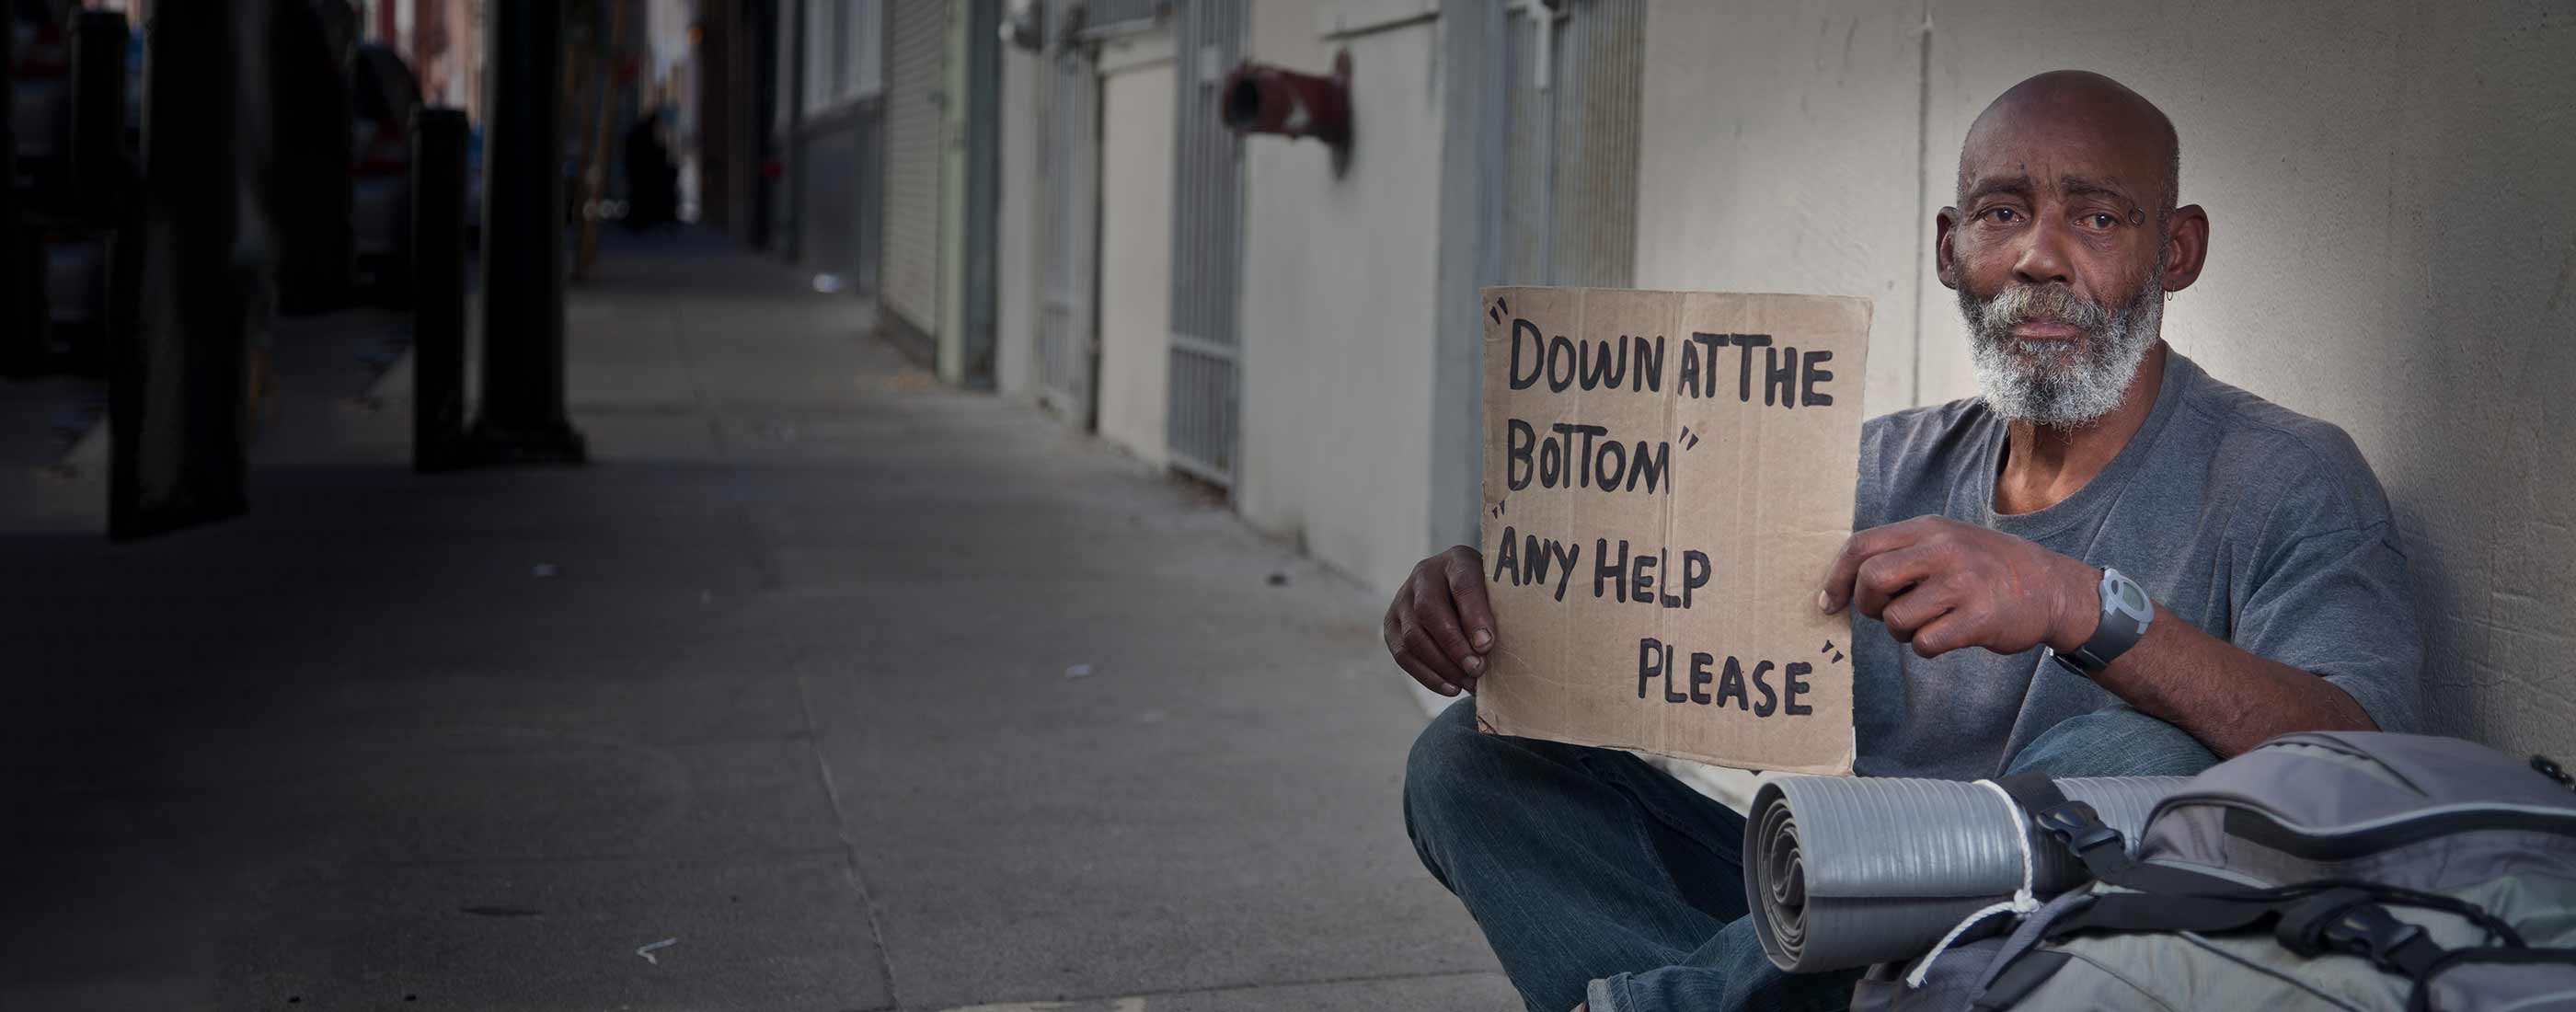 Photo of homeless man holding up sign that reads "Down at the bottom - Any help please"